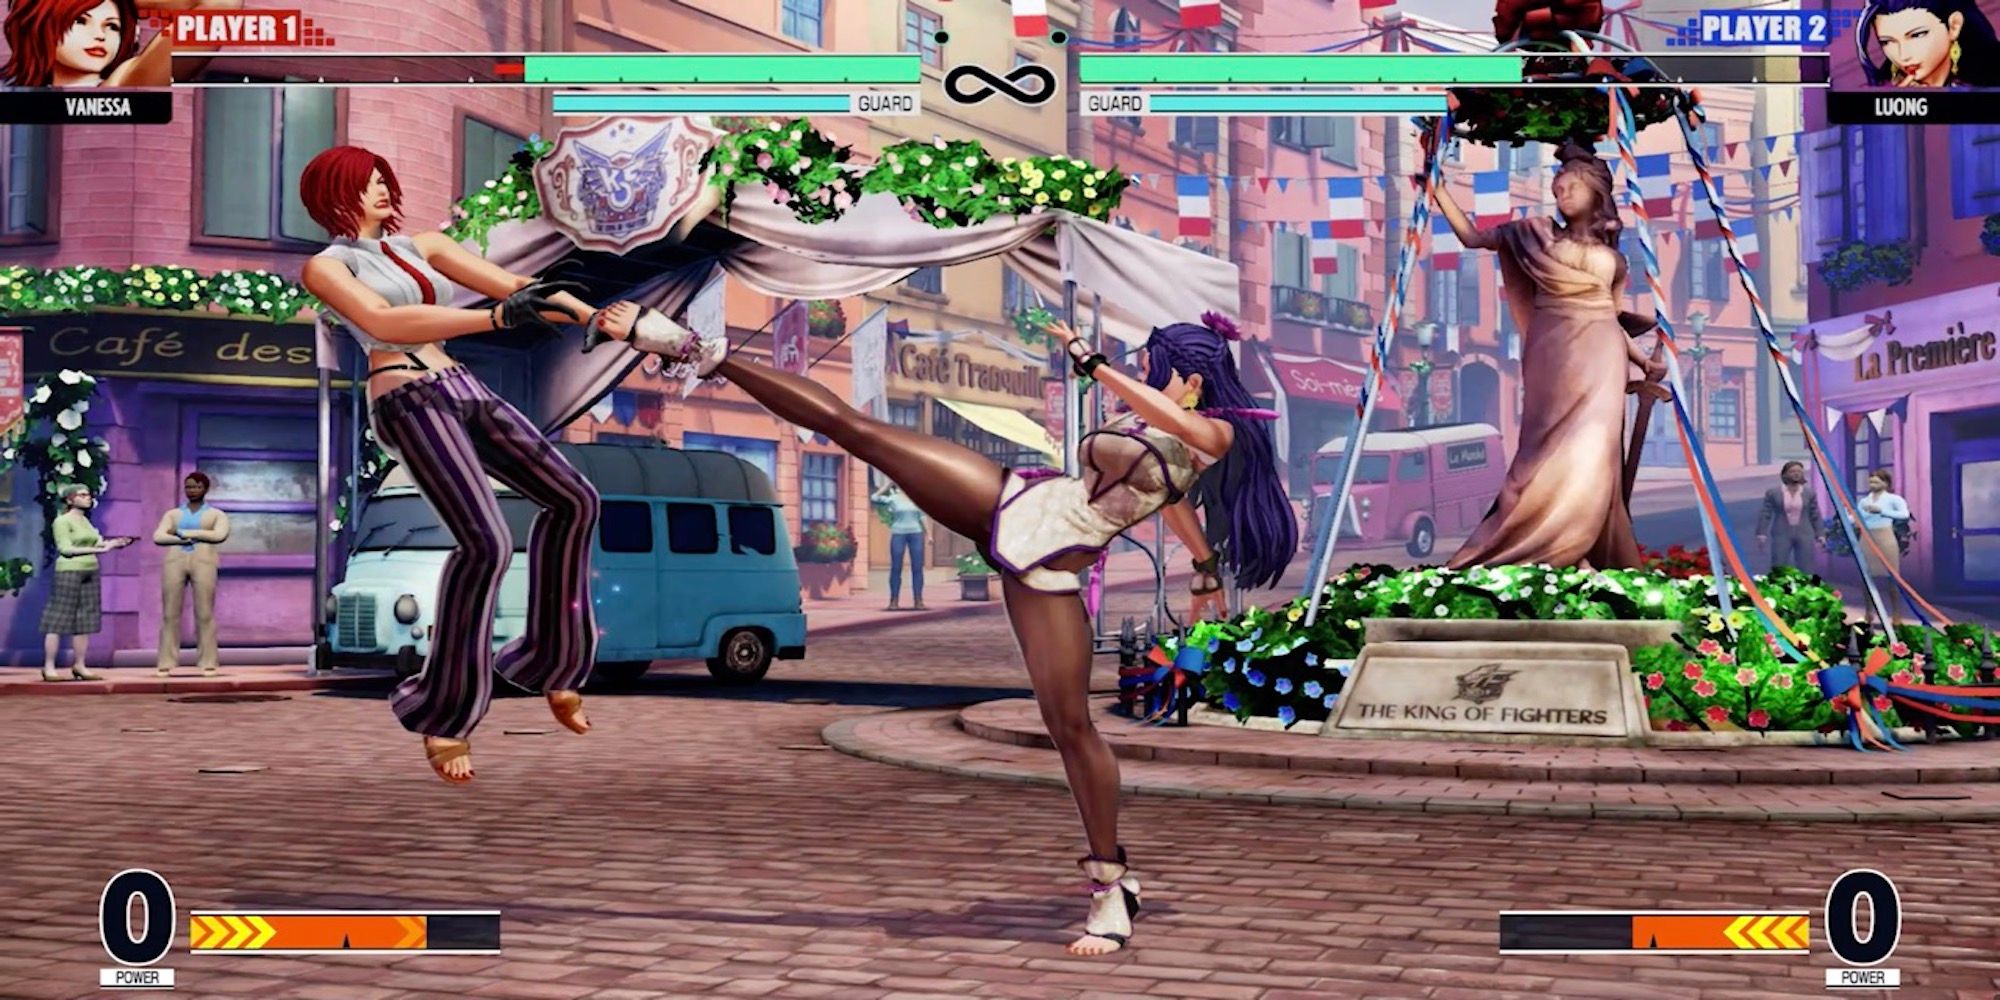 Fighting a match in The King of Fighters 15